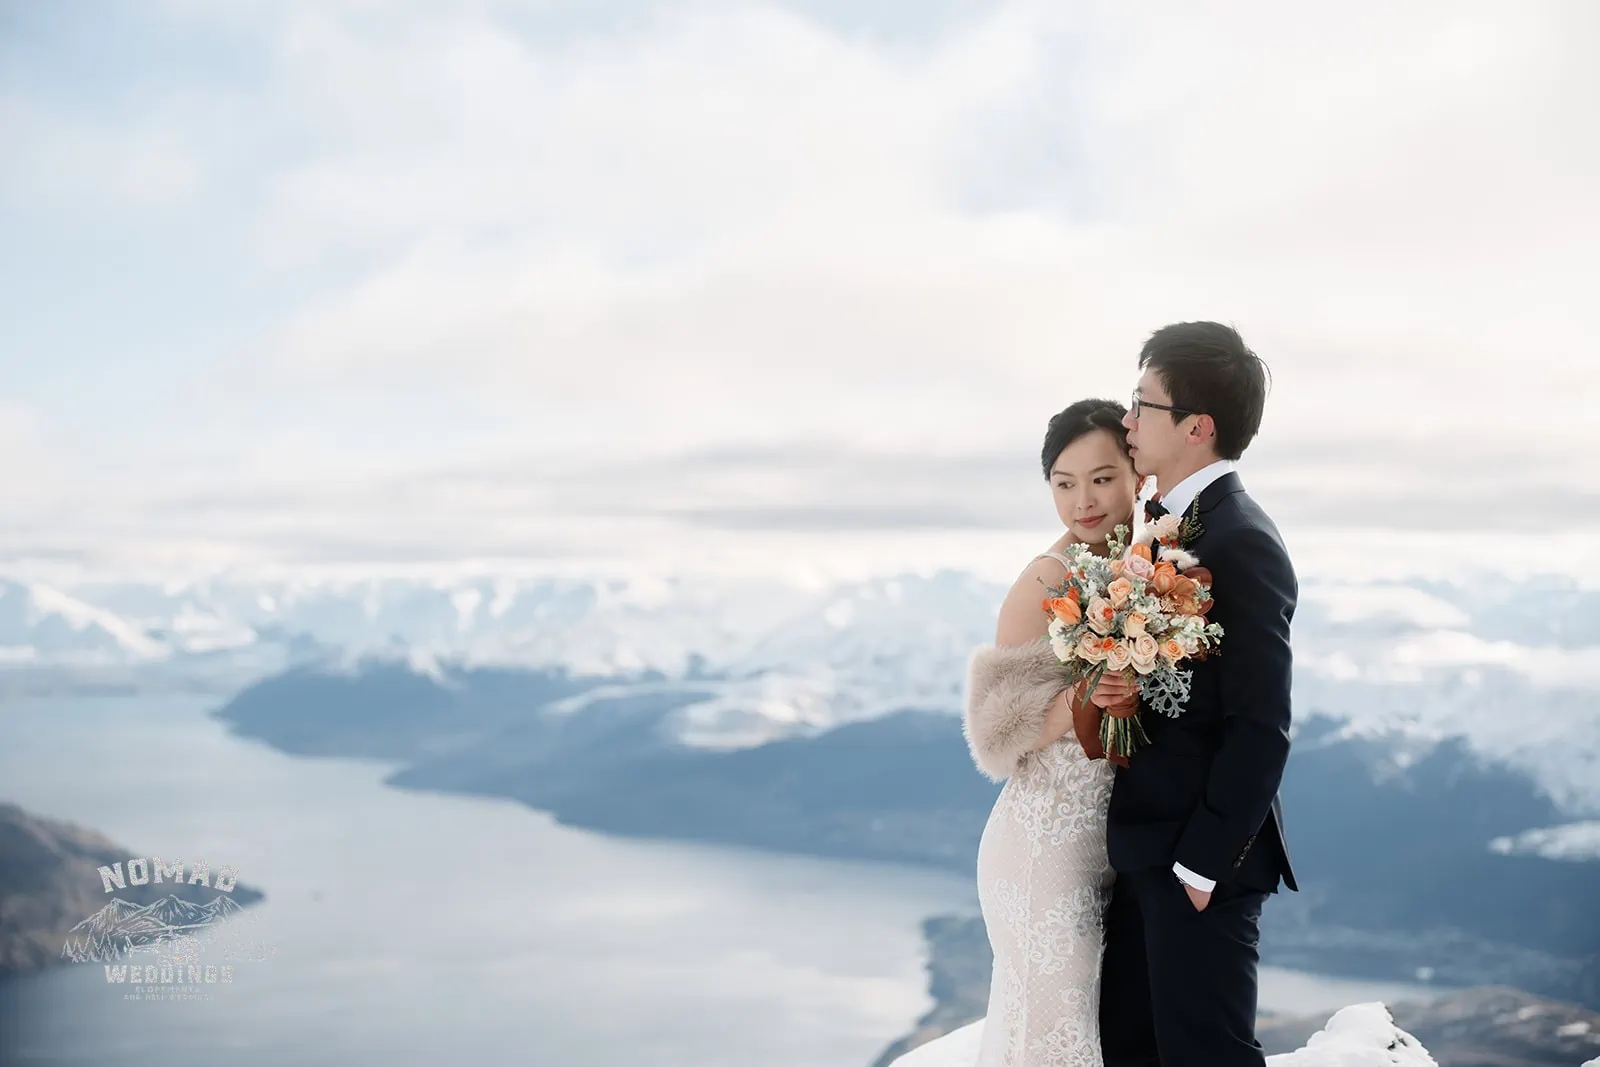 Joanna and Tony, a bride and groom from New Zealand, capturing their pre-wedding shoot on top of a mountain overlooking Lake Wanaka near Queenstown.